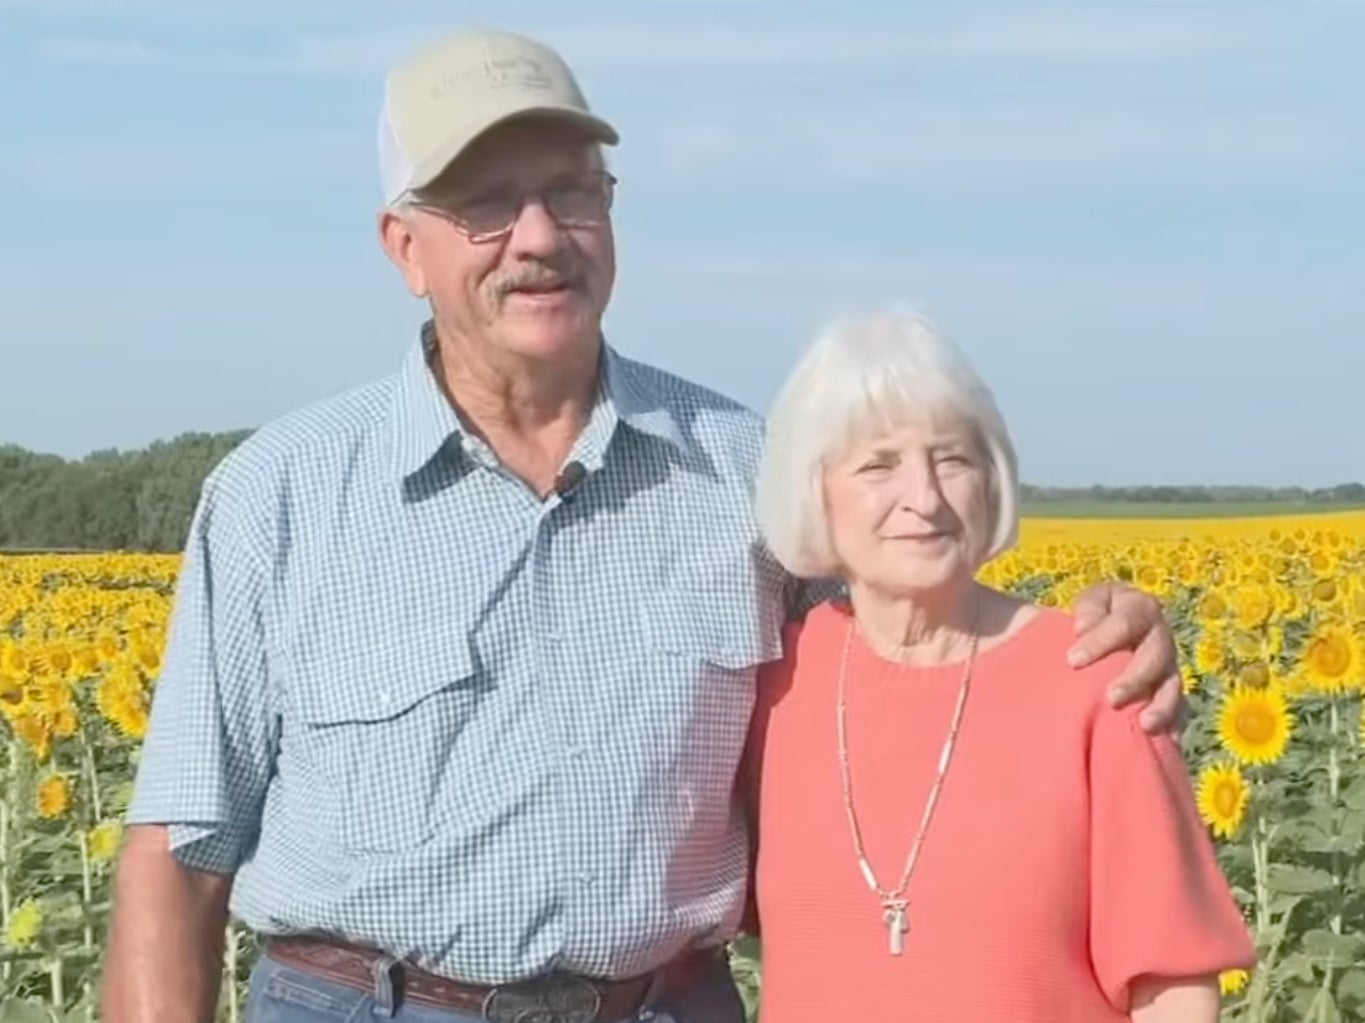 Farmer plants 80 acres of sunflowers to surprise wife for 50th wedding anniversary The Independent image